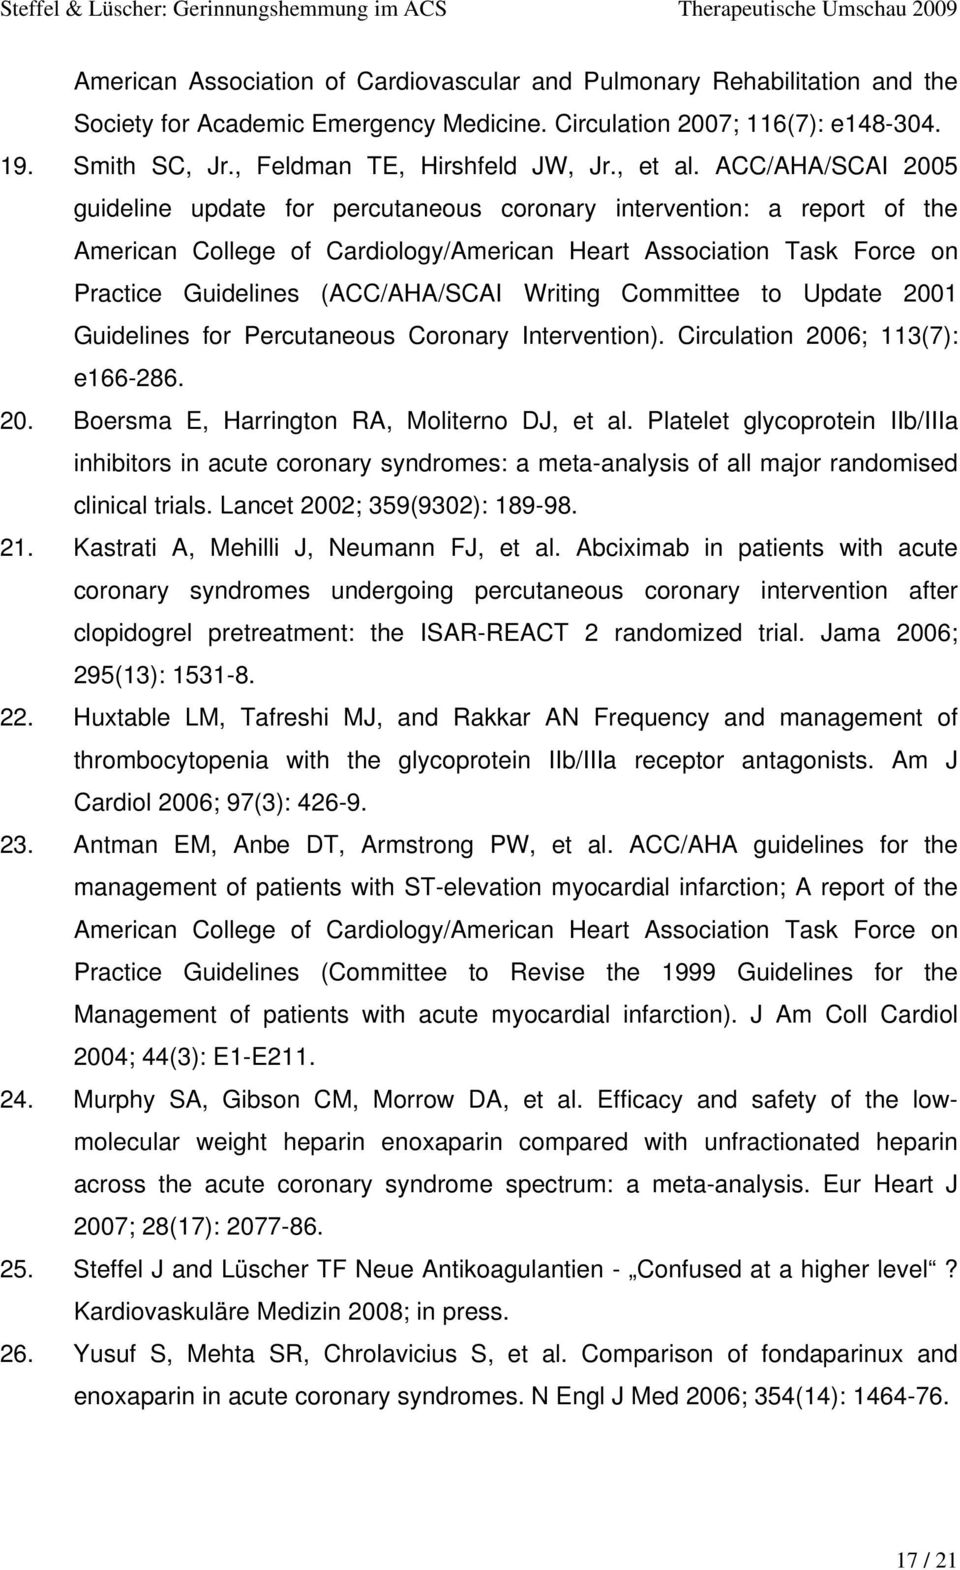 ACC/AHA/SCAI 2005 guideline update for percutaneous coronary intervention: a report of the American College of Cardiology/American Heart Association Task Force on Practice Guidelines (ACC/AHA/SCAI